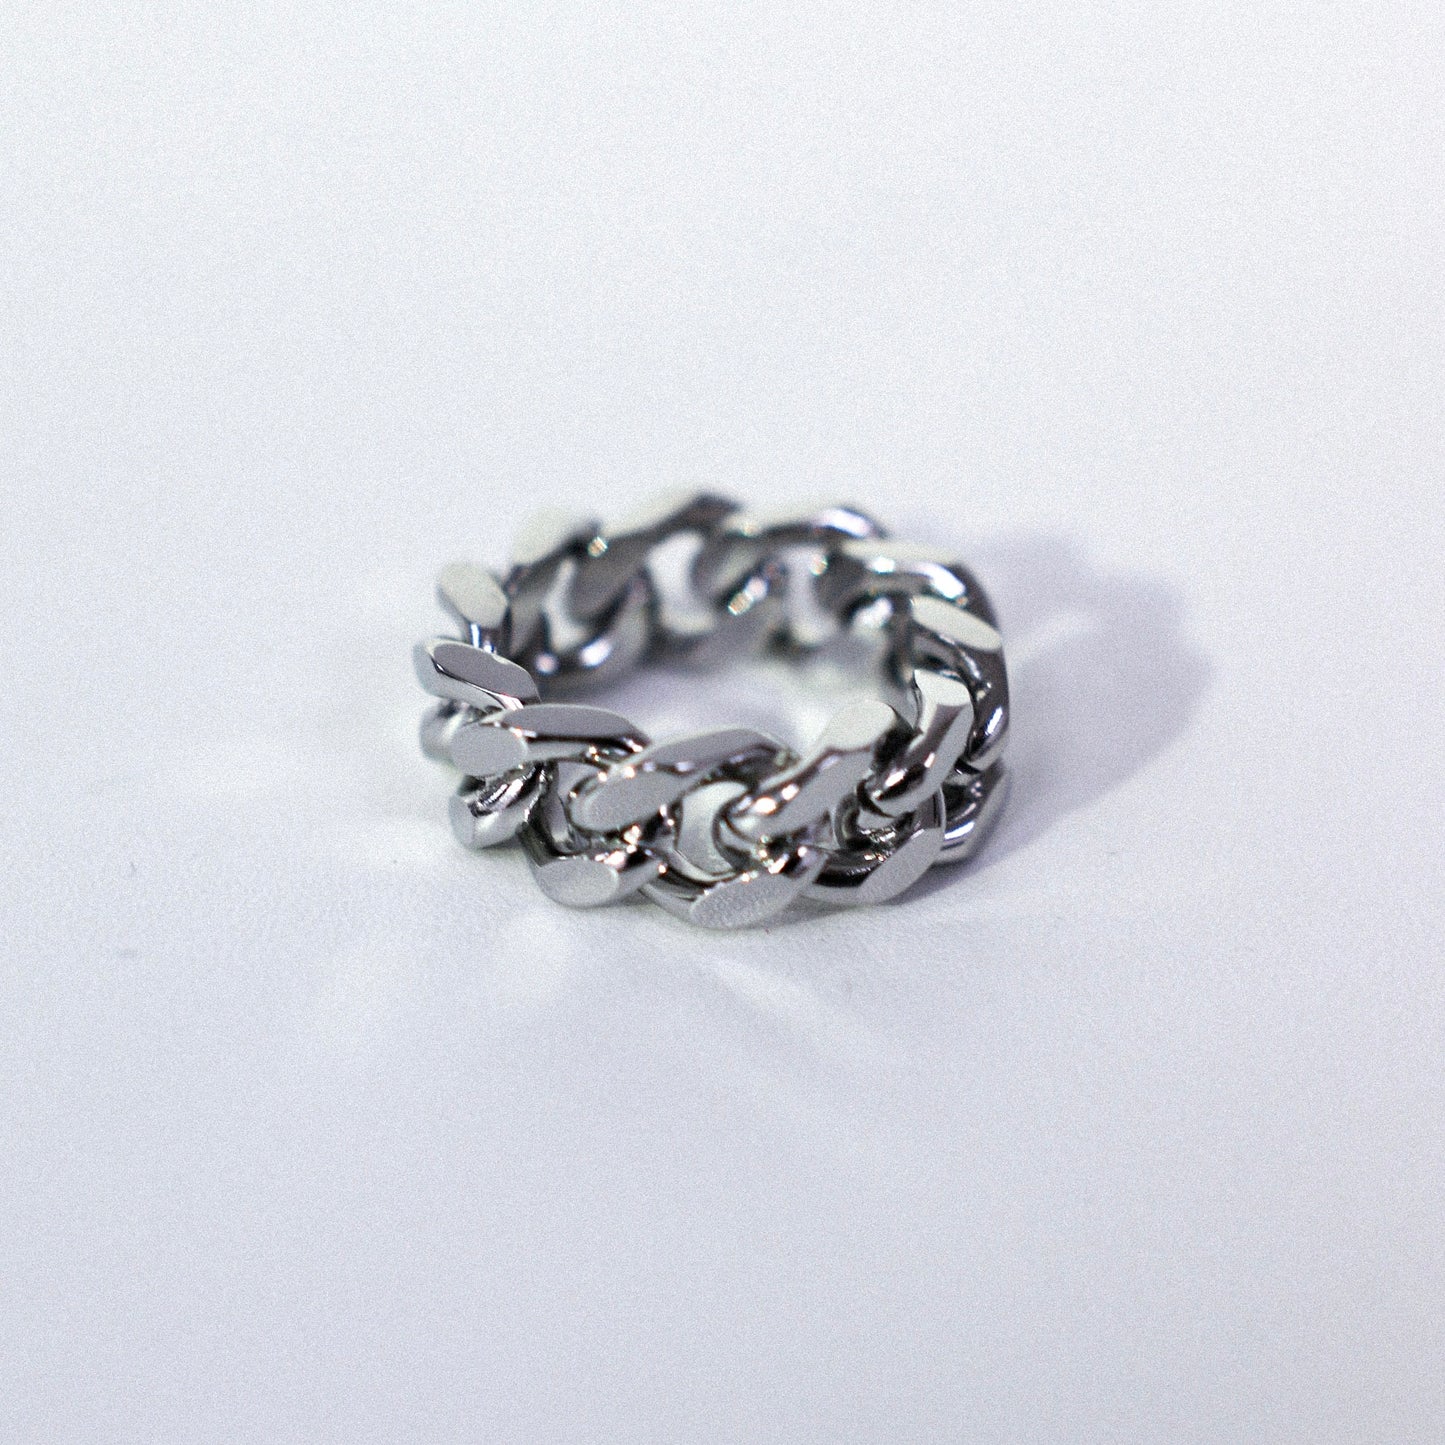 Twisted ring